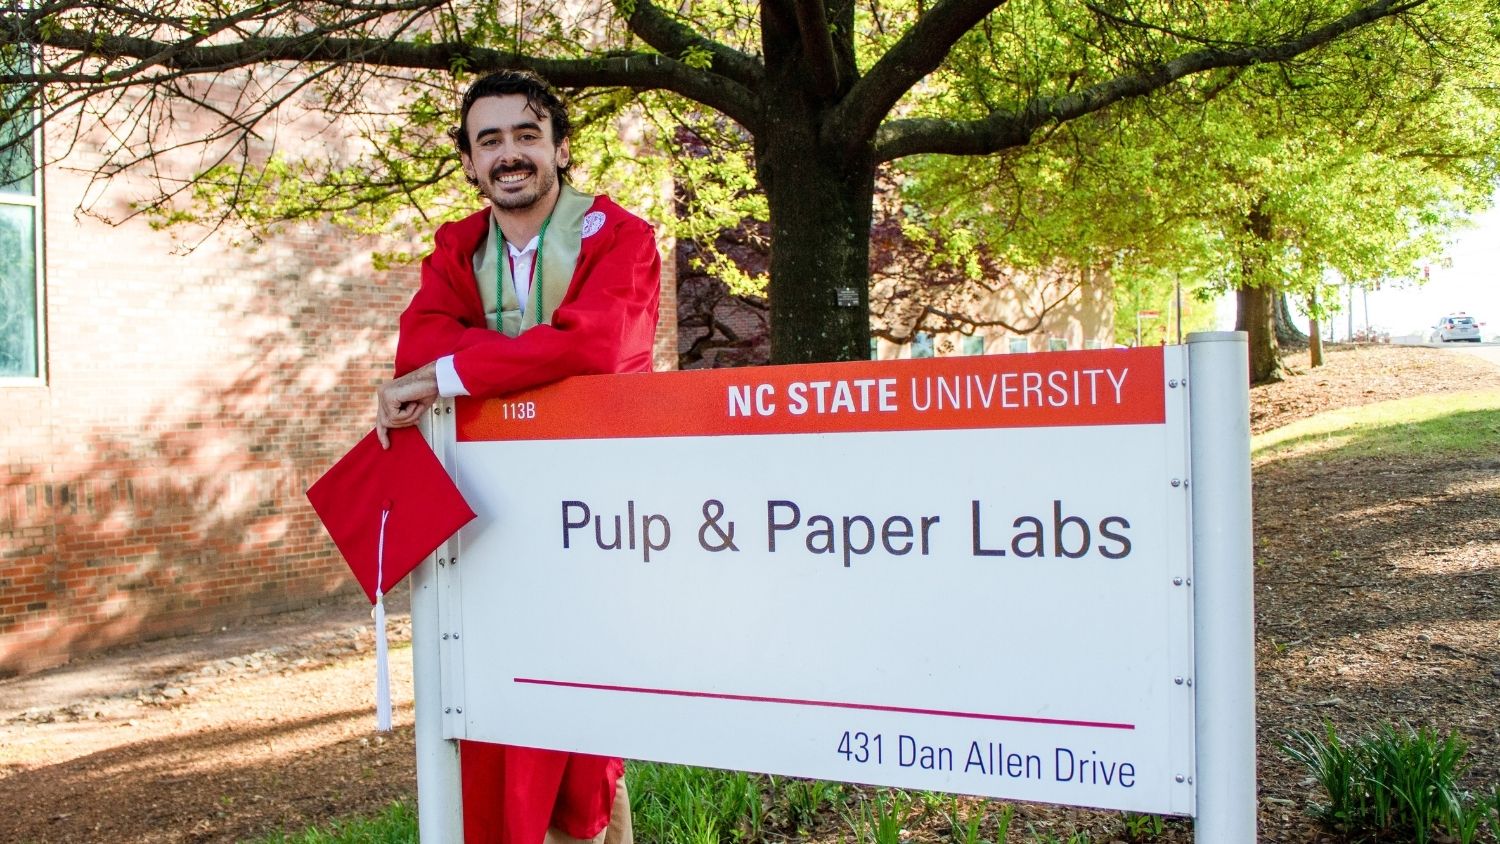 Brendan Tumpey stands in graduation robe by NCSU Pulp and Paper Labs sign